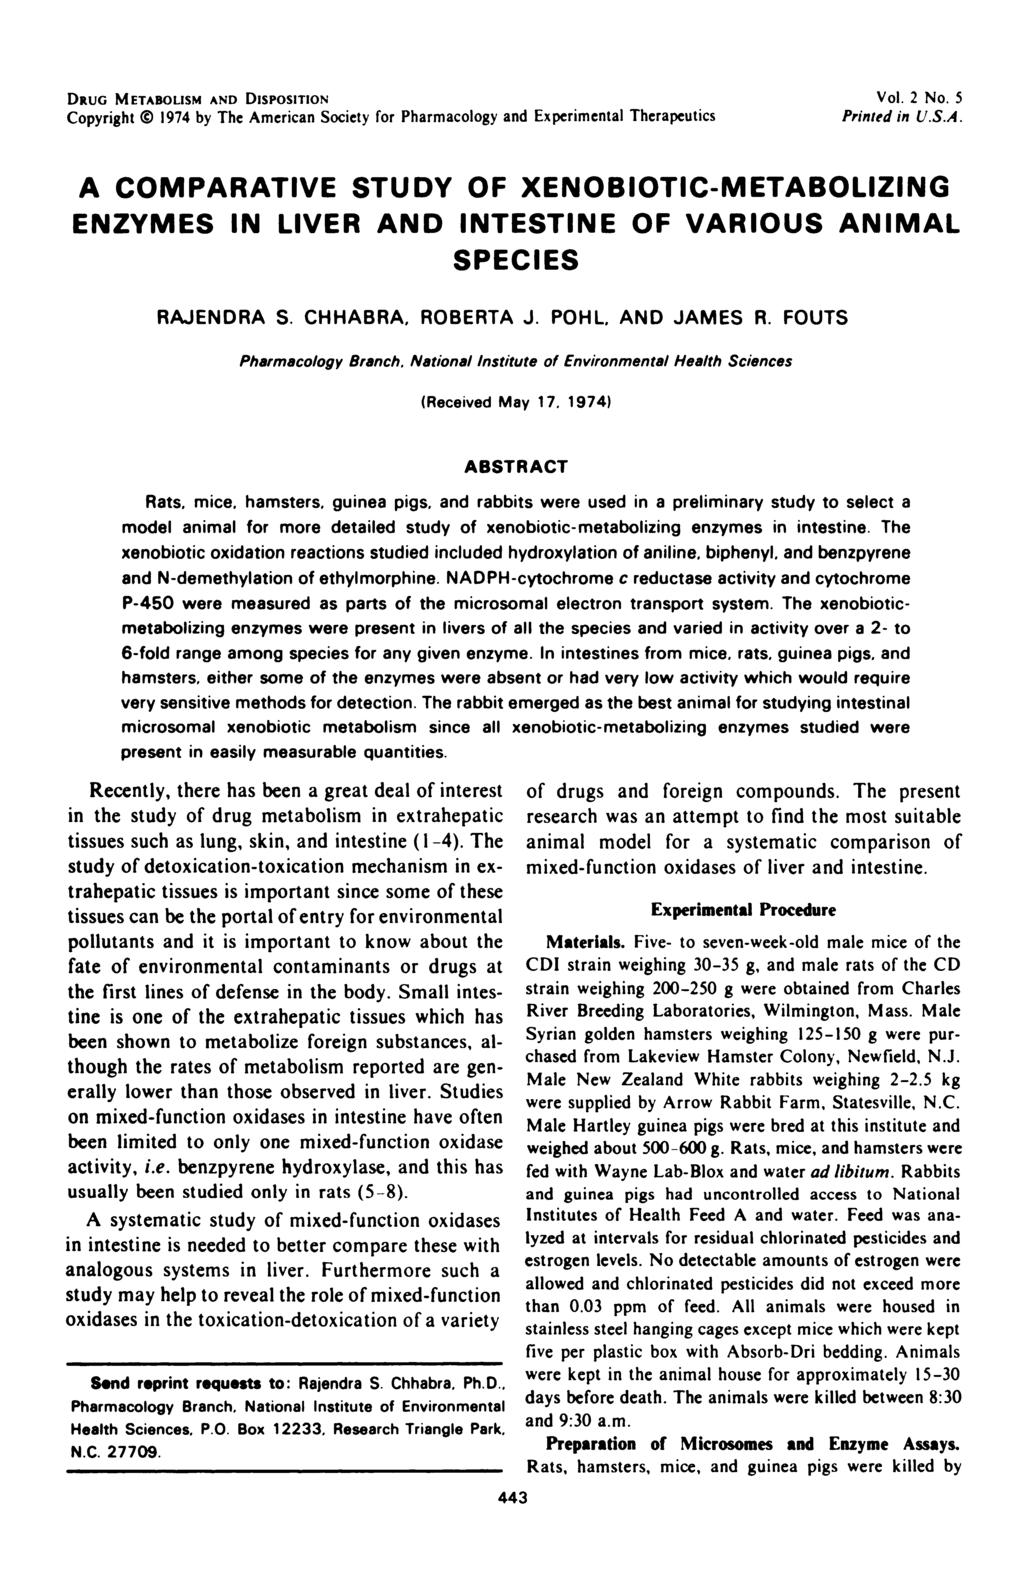 DRUG METABOLISM A DIsPOsITIoN Copyright #{174} 1974 by The American Society for Pharmacology and Experimental Therapeutics Vol. 2 No. S Printed in U.S.A. A COMPARATIVE STUDY OF XENOBIOTIC-METABOLIZING ENZYMES IN LIVER A INTESTINE OF VARIOUS ANIMAL SPECIES RAJERA S.